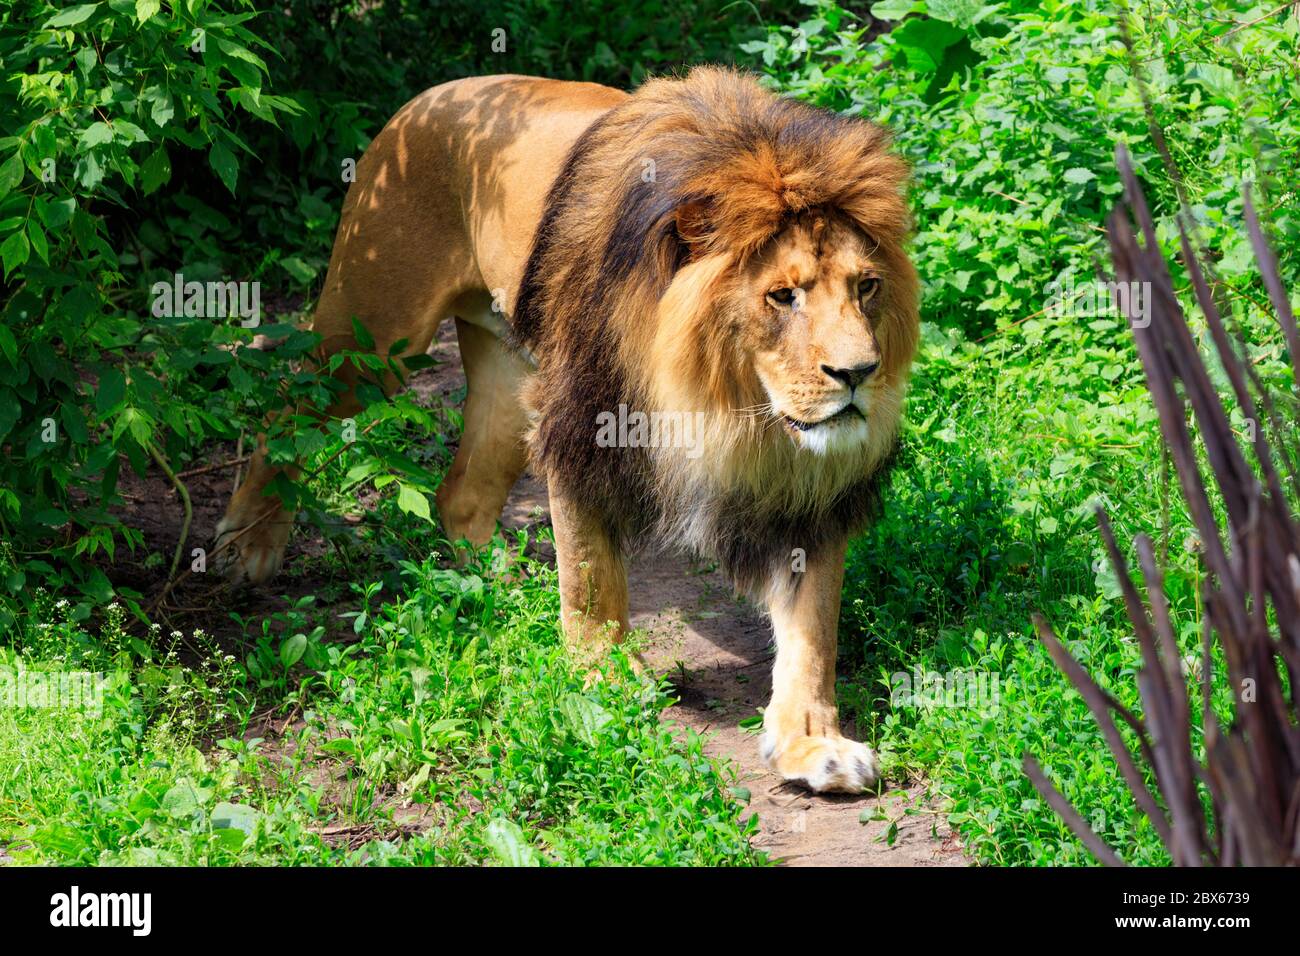 A wild lion with a large shaggy orange mane of hair walks along a forest path among green shrubs in sunny daytime. Close-up. Stock Photo